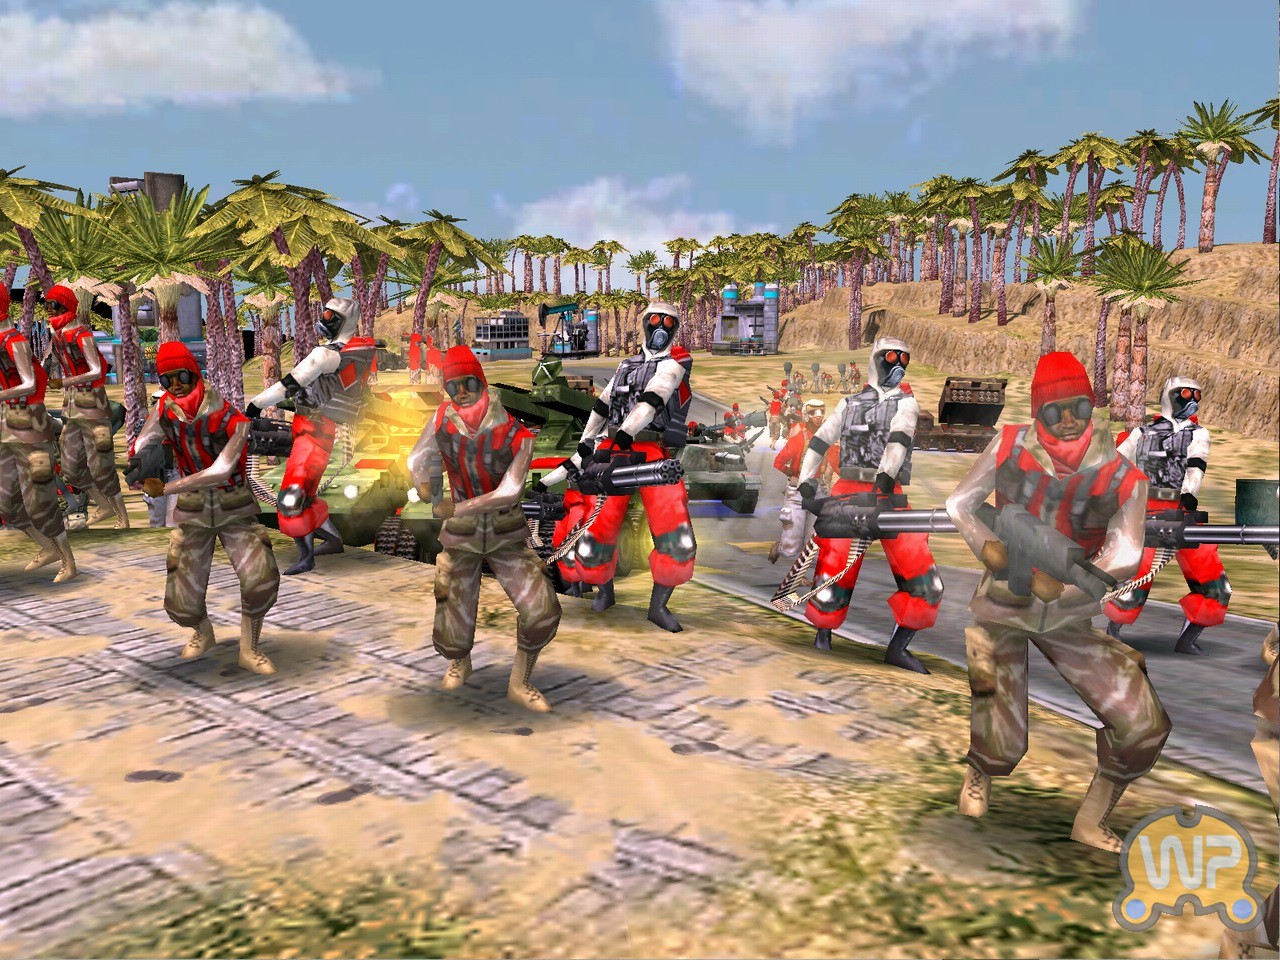 empire earth torrent for windows 8